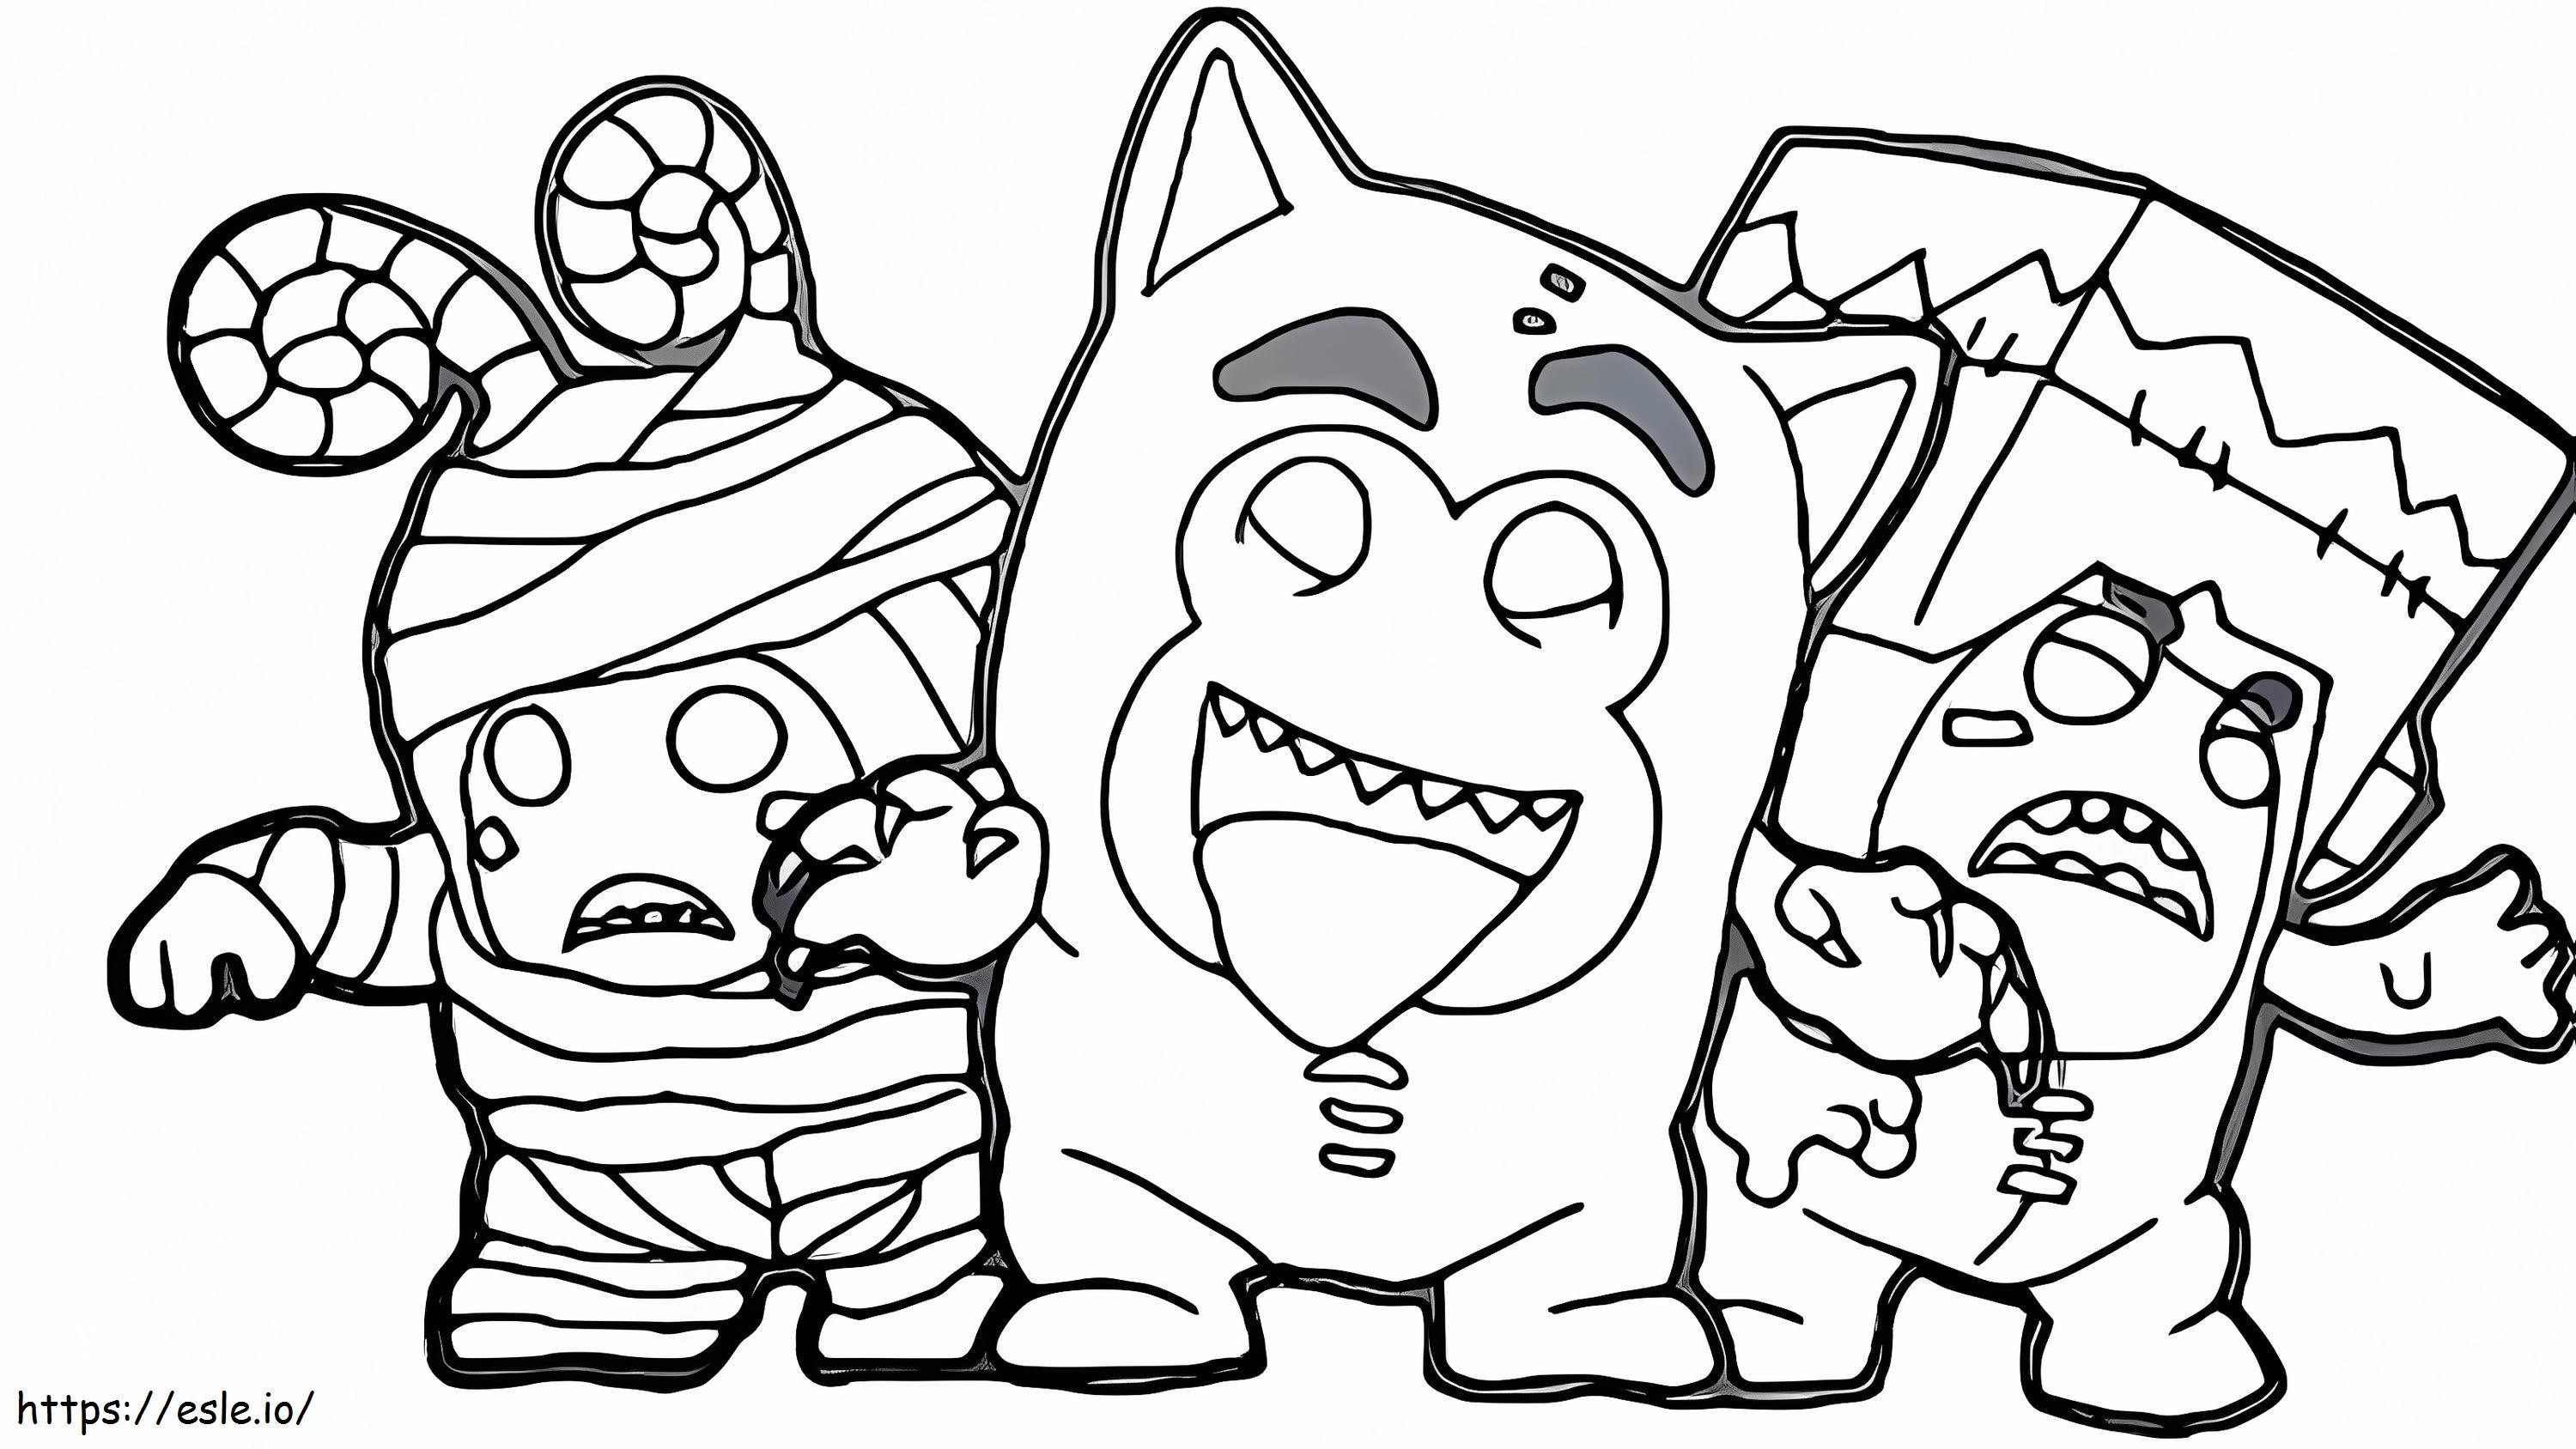 Magical Oddbods coloring page